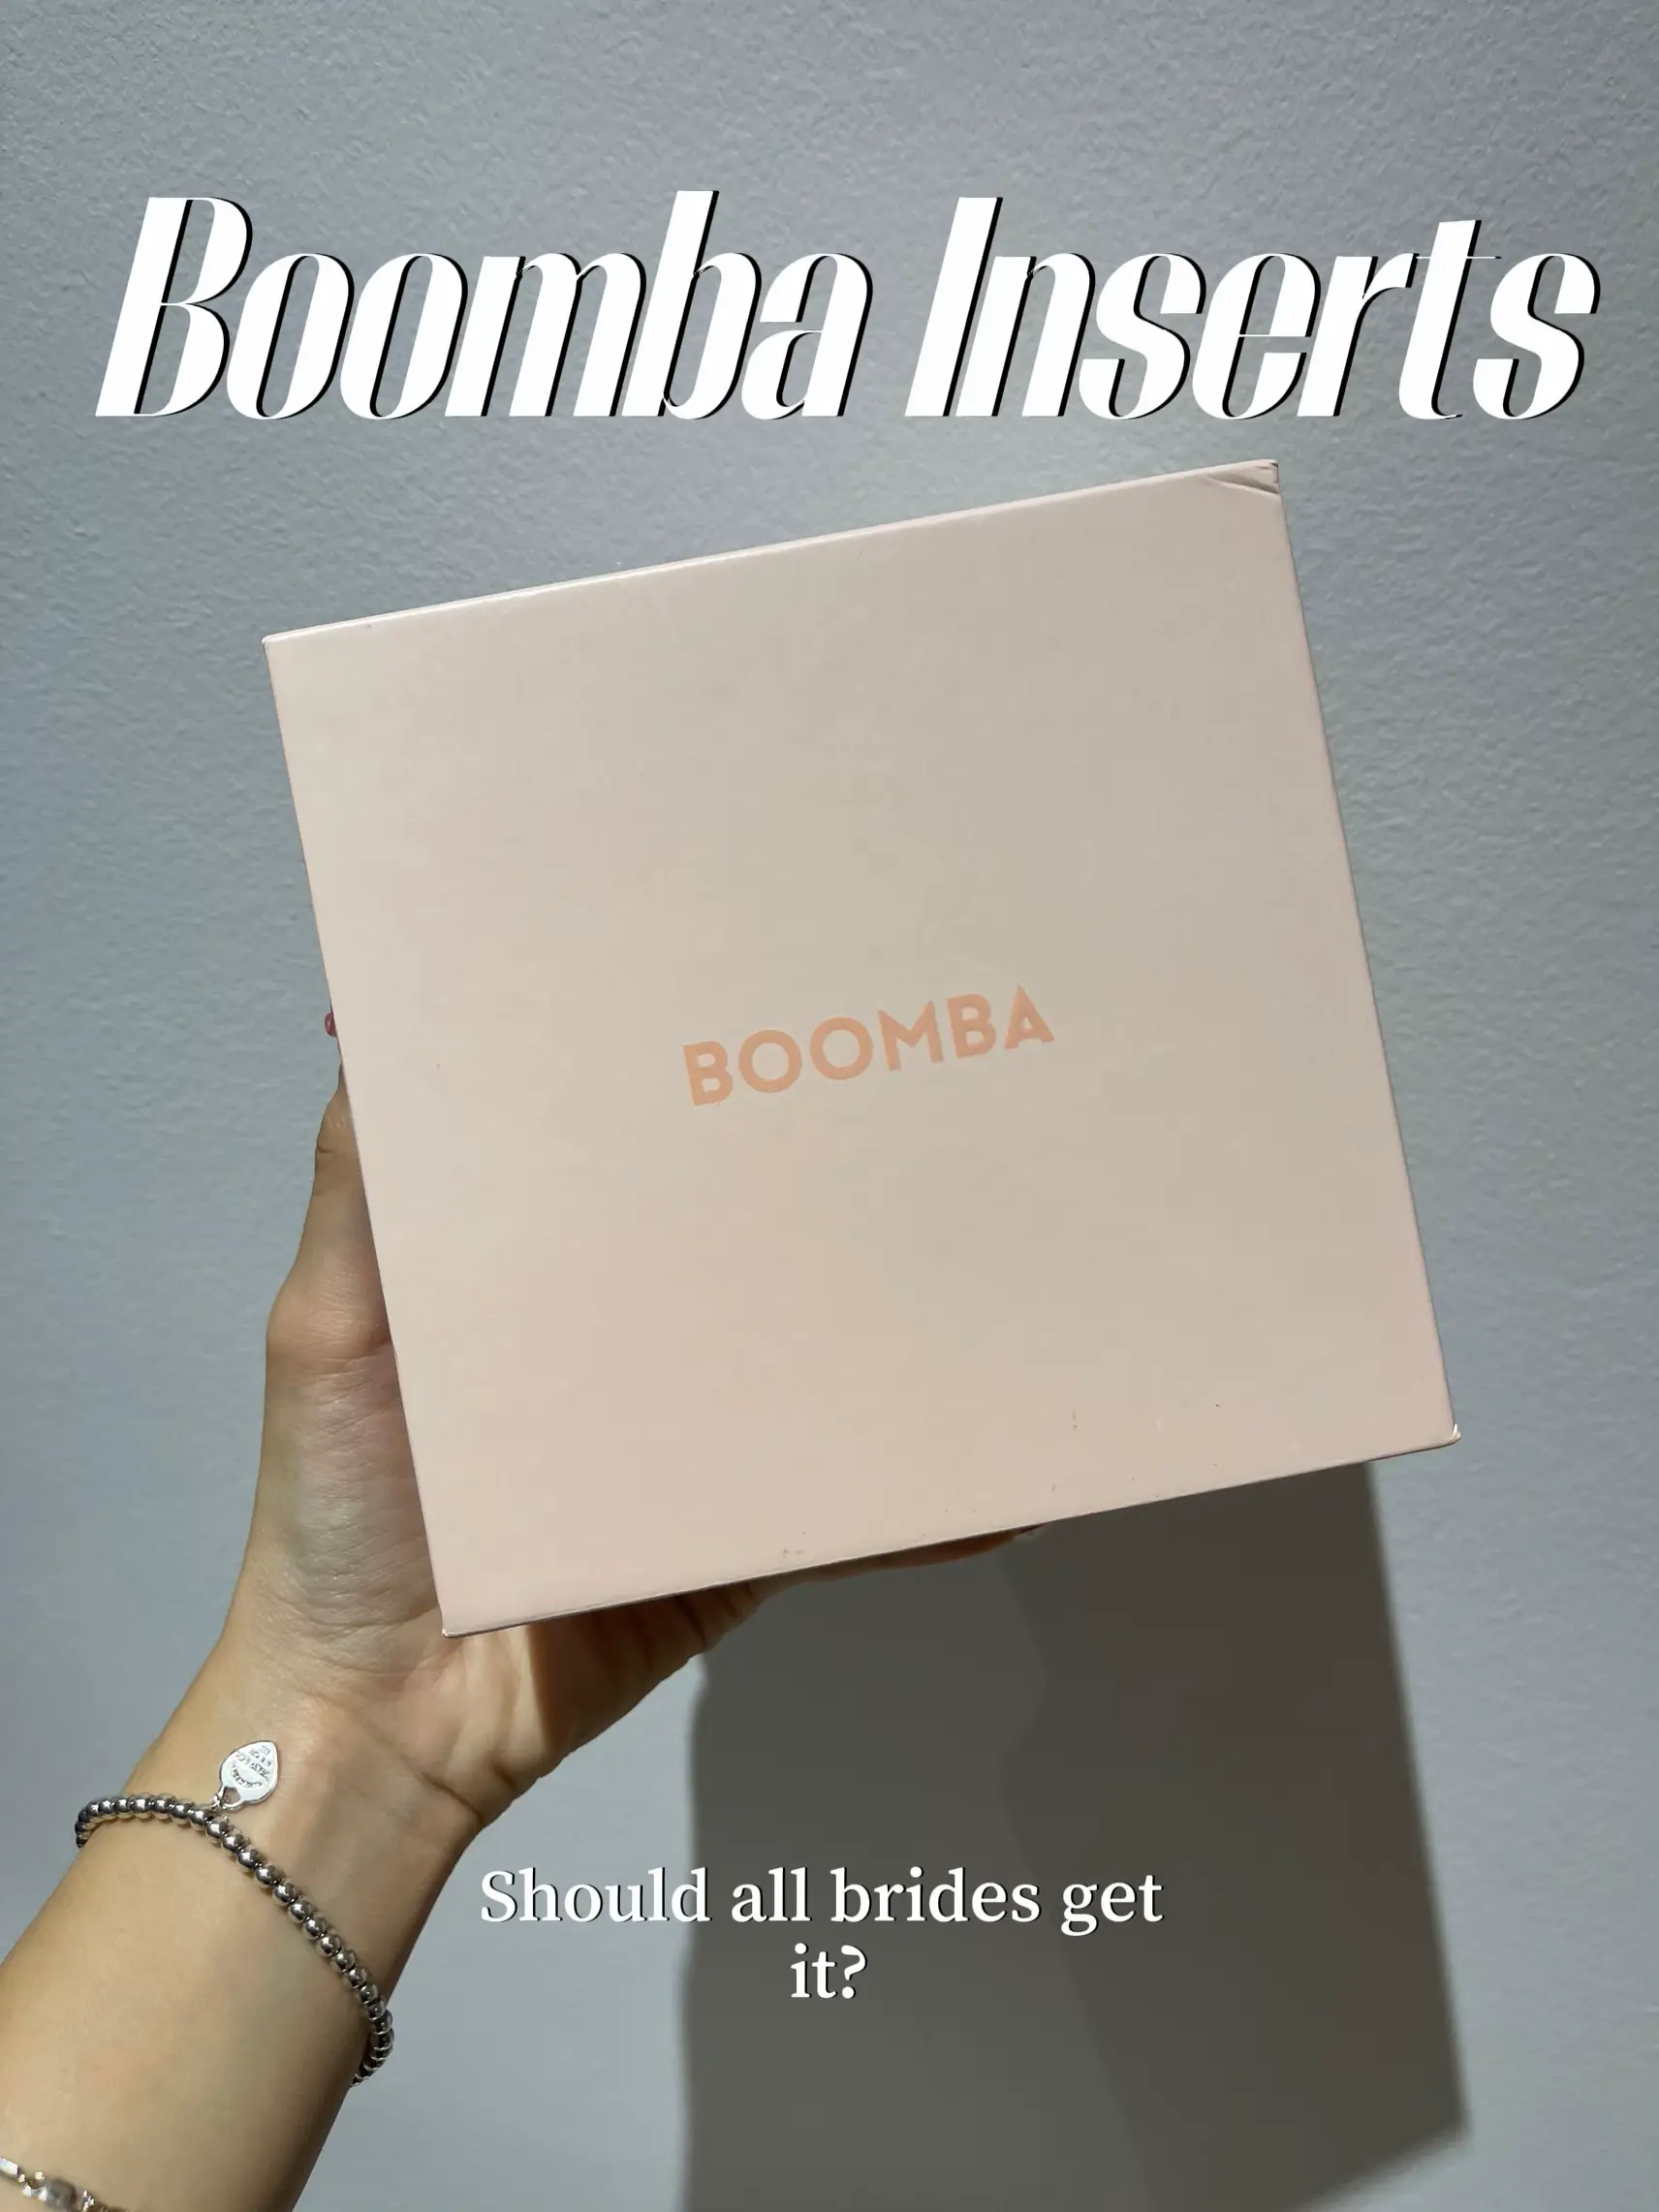 BOOMBA - Hey BOOMBA babes! We often get questions asking